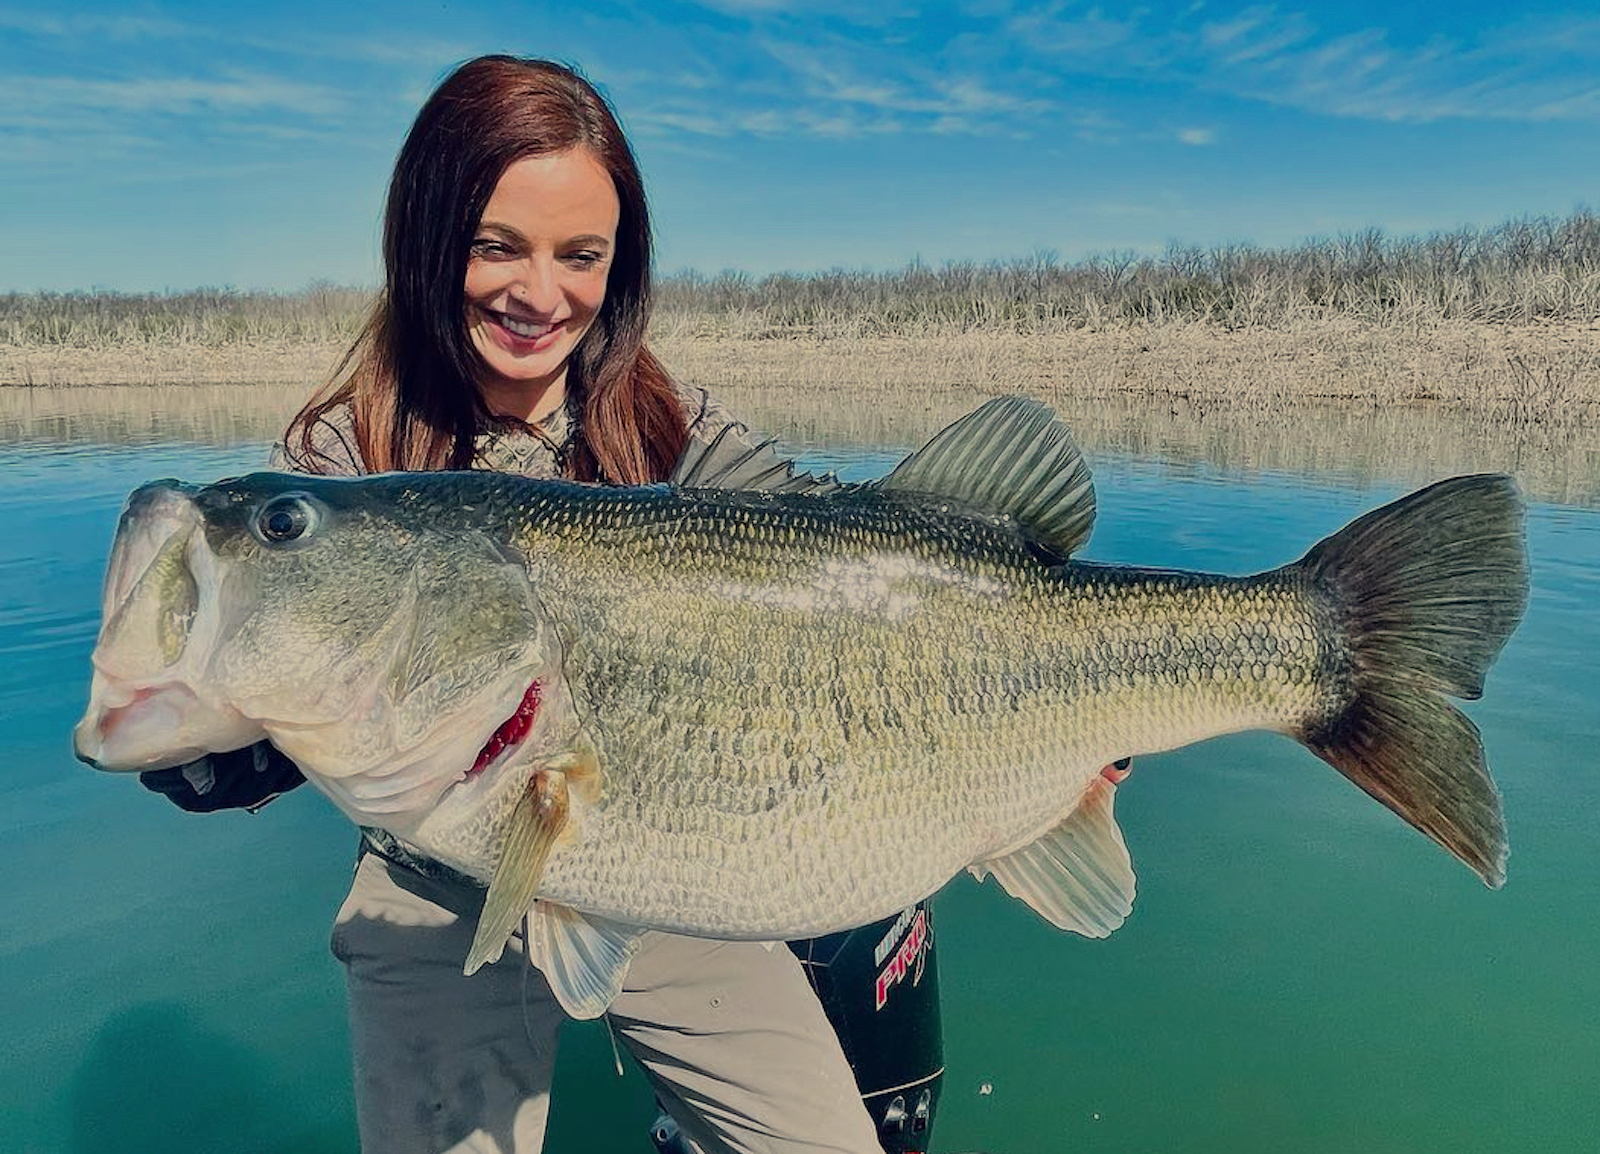 Lady angler submits world-record bass from this Texas lake